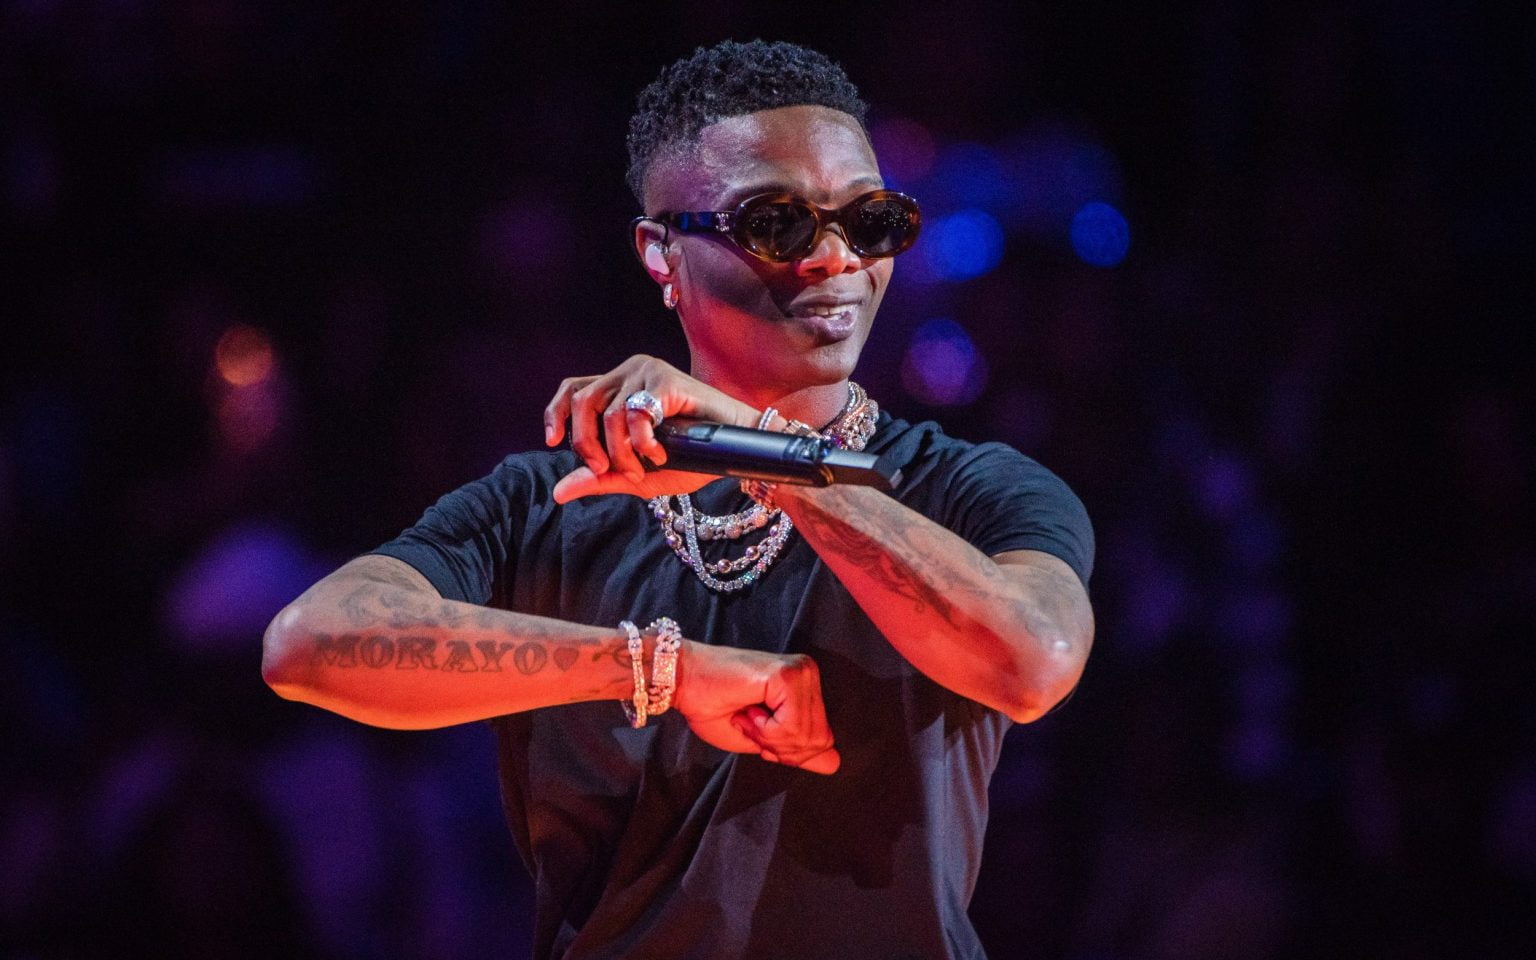 ‘I got enough music to retire’ – Wizkid says on 33rd birthday mp3 download